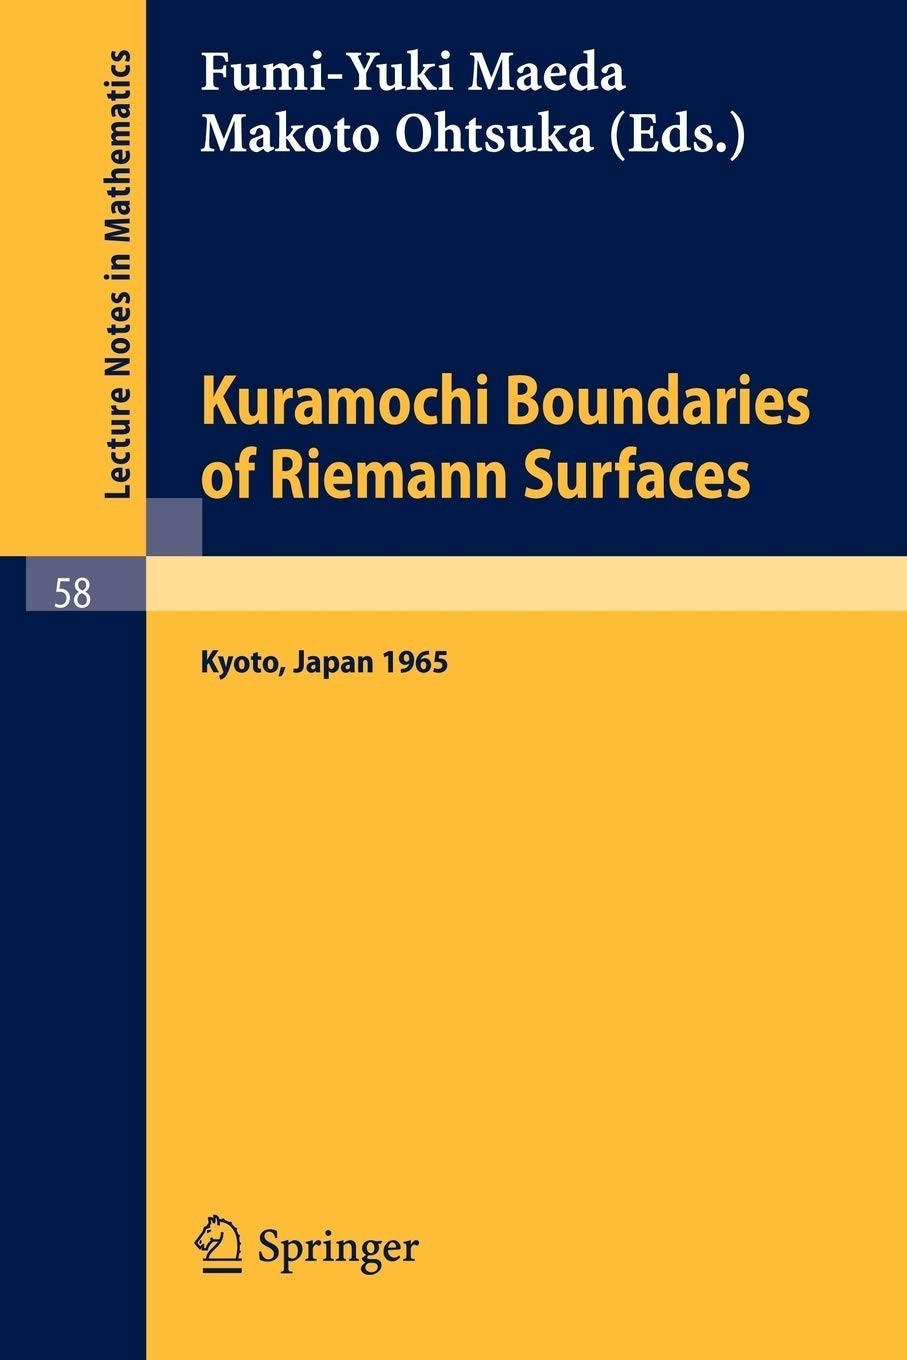 Kuramochi Boundaries of Riemann Surfaces: A Symposium Held at the Research Institute for Mathematical Sciences, Kyoto University, October 1965